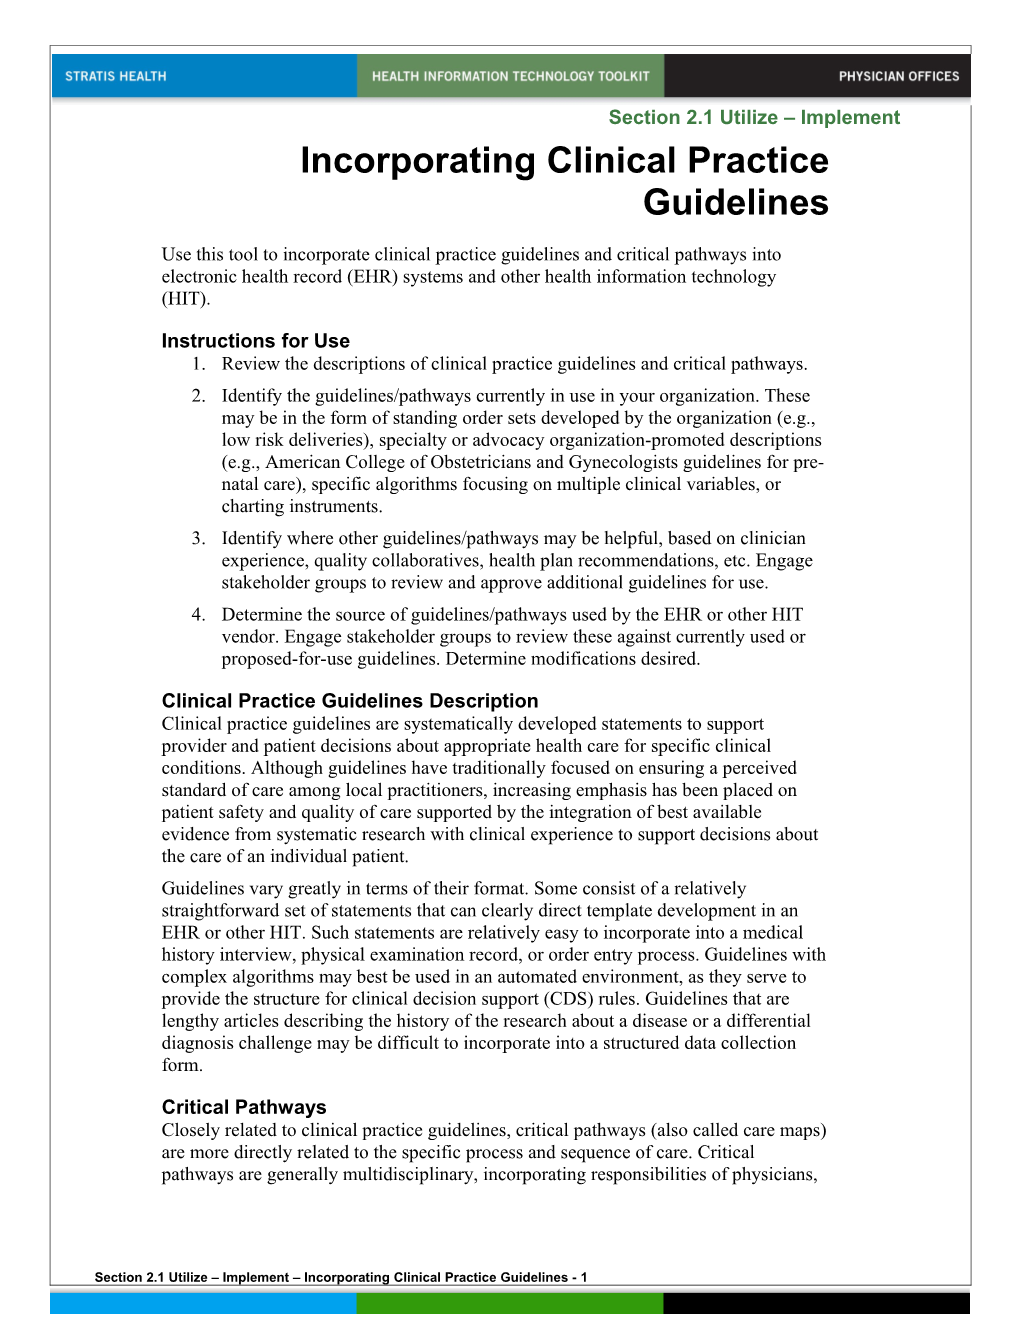 Incorporating Clinical Practice Guidelines